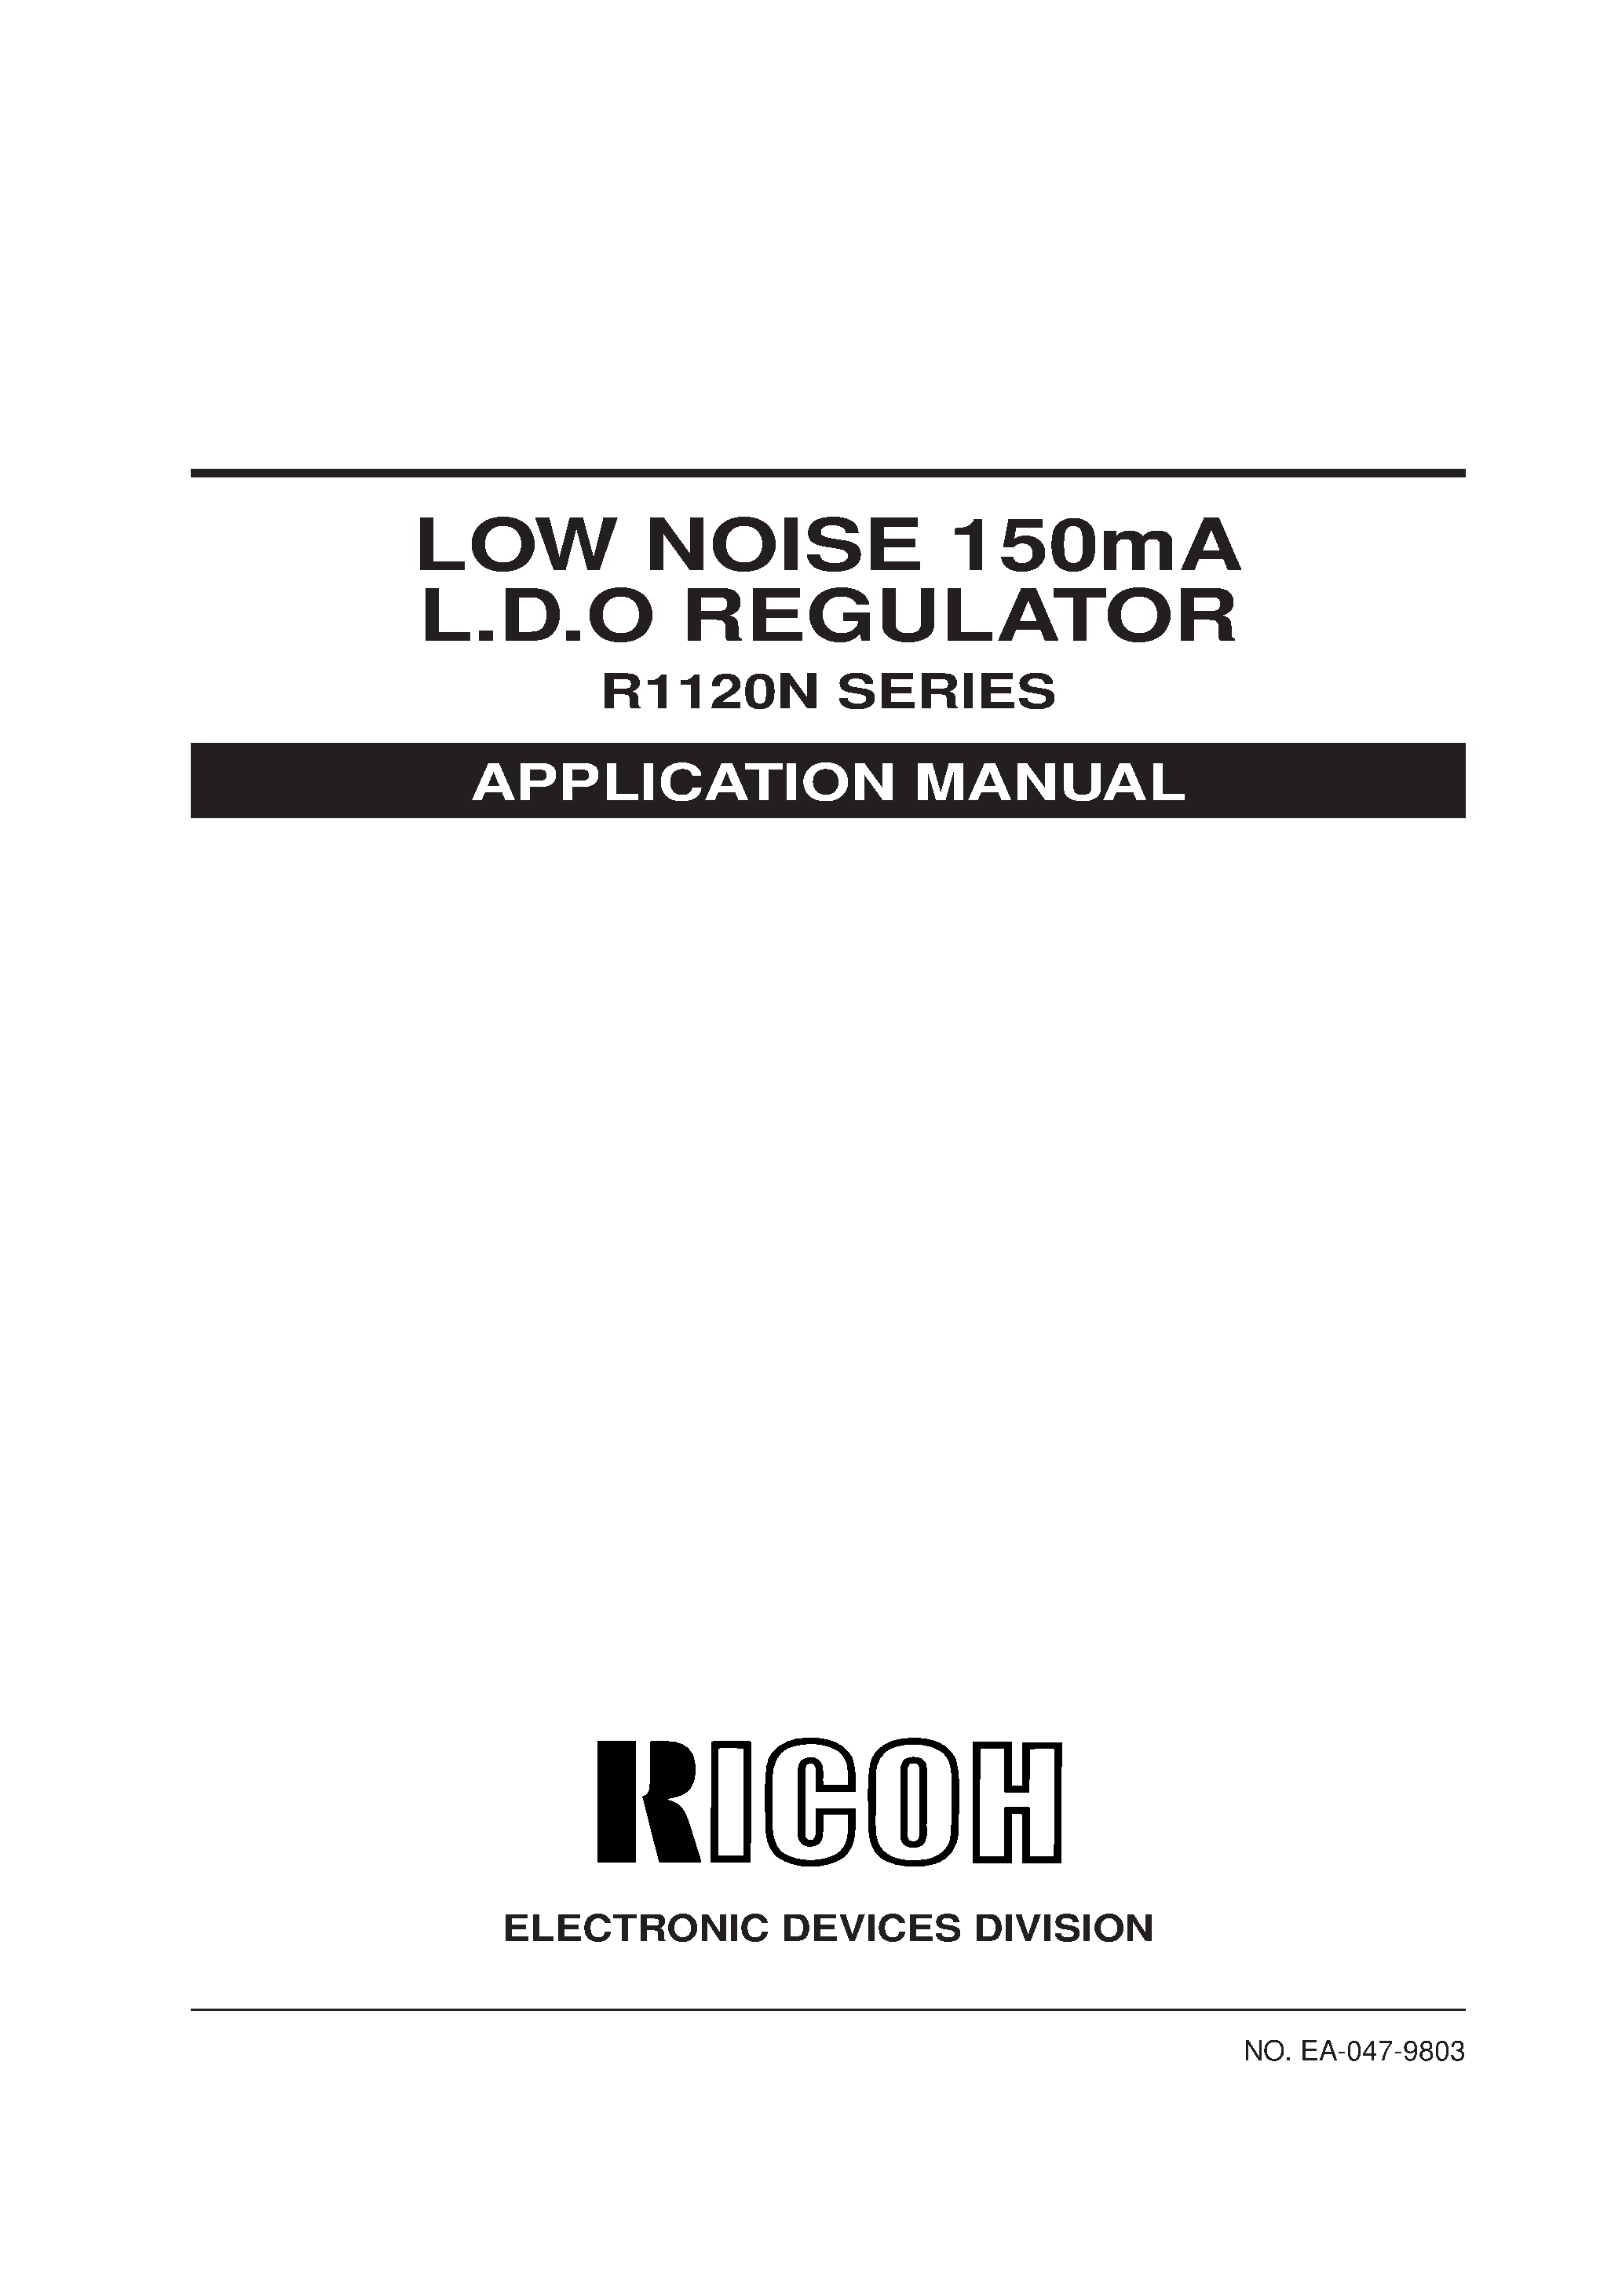 Datasheet R1120N501A-TR - LOW NOISE 150mA L.D.O REGULATOR page 1